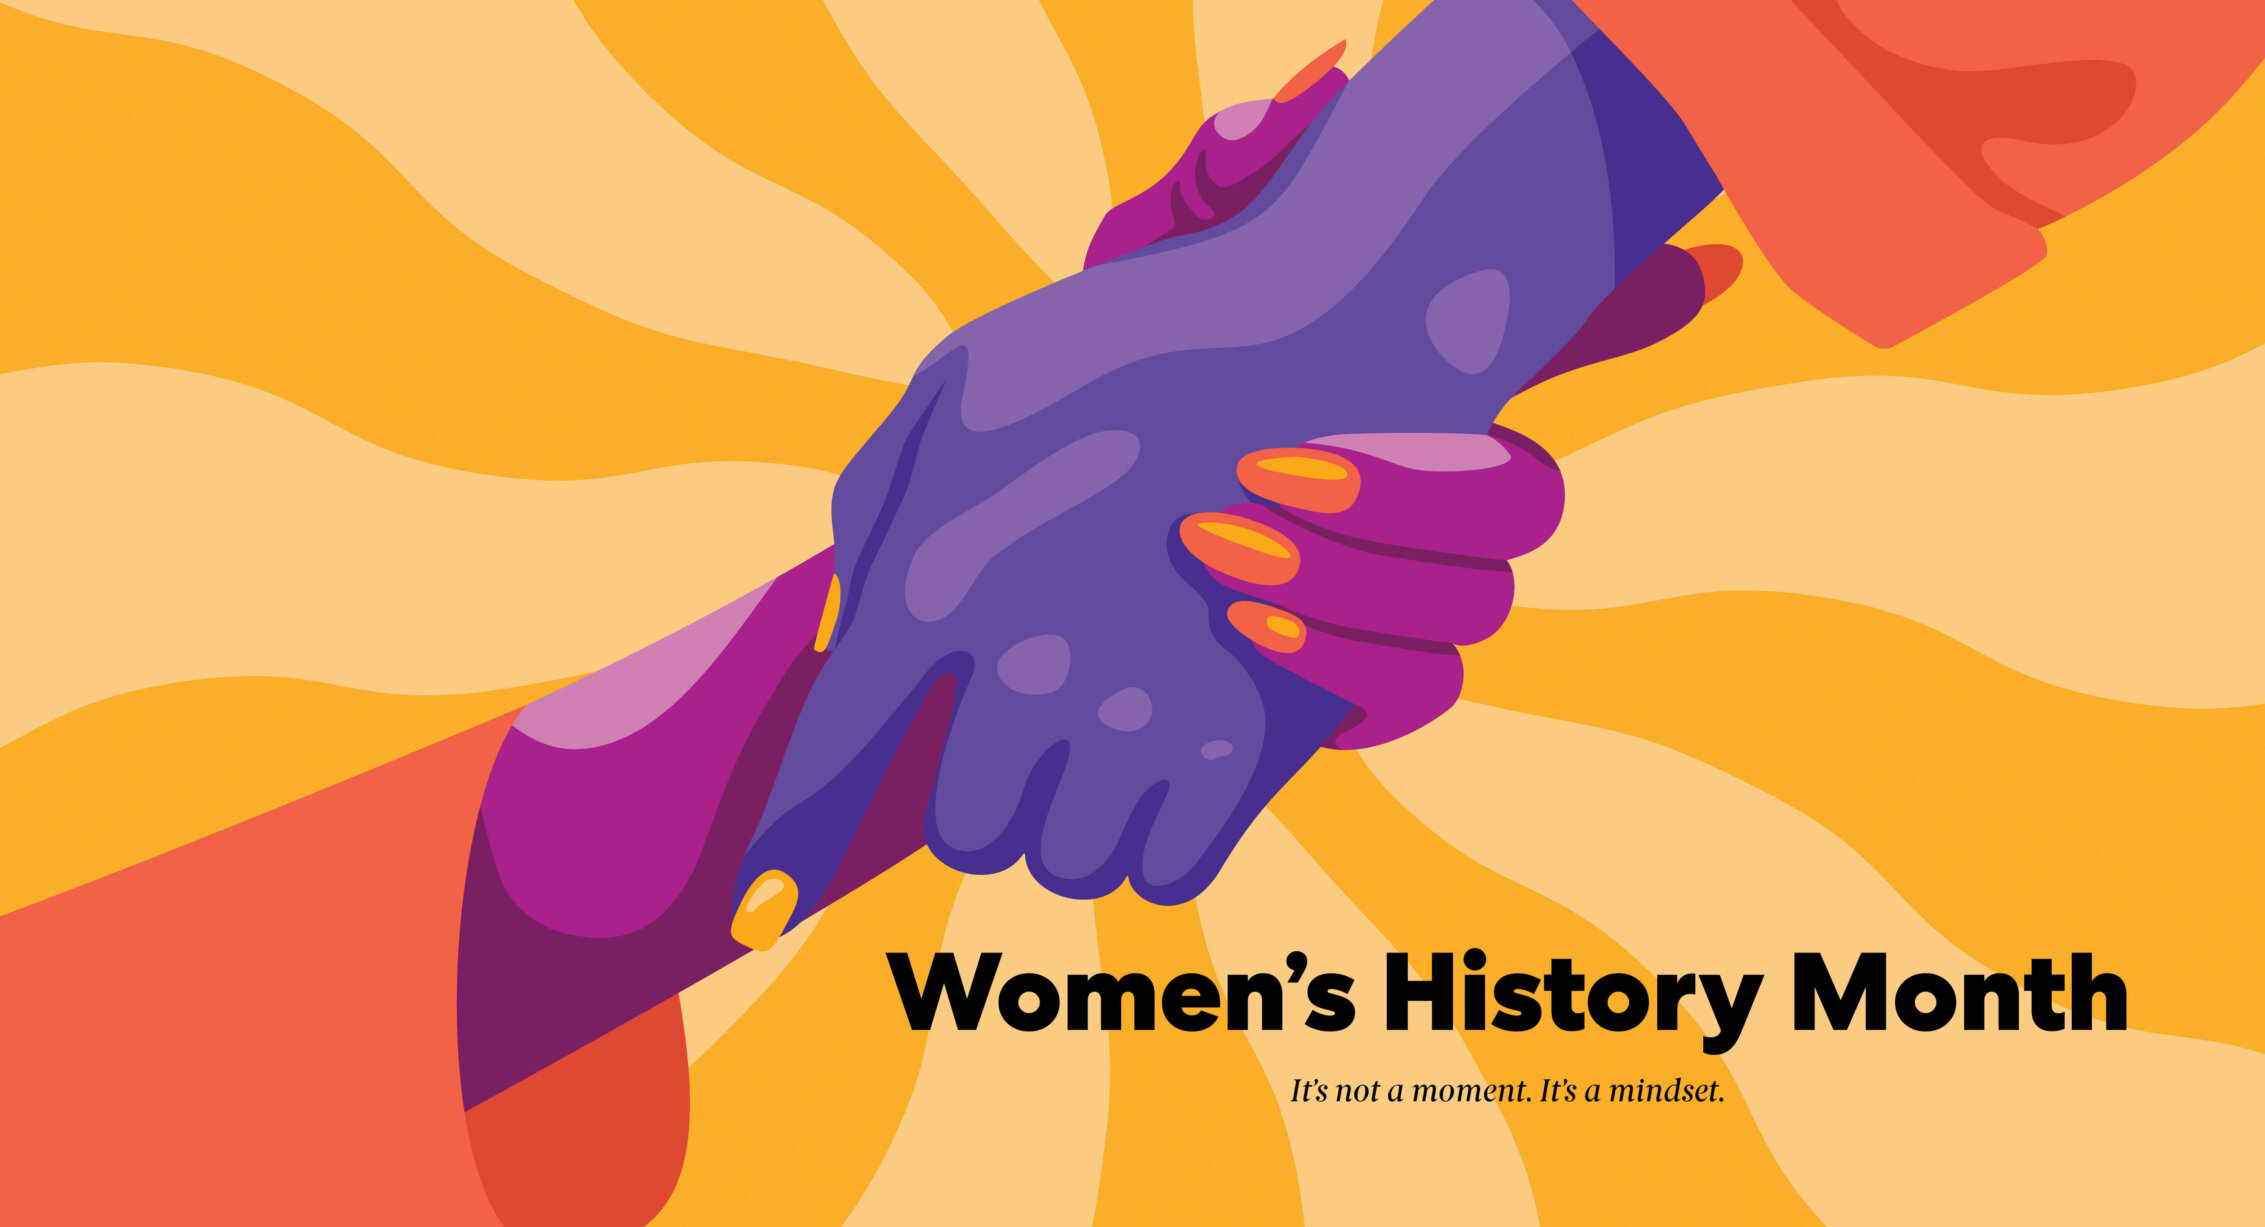 Women's History Month illustration by Anna Wissler